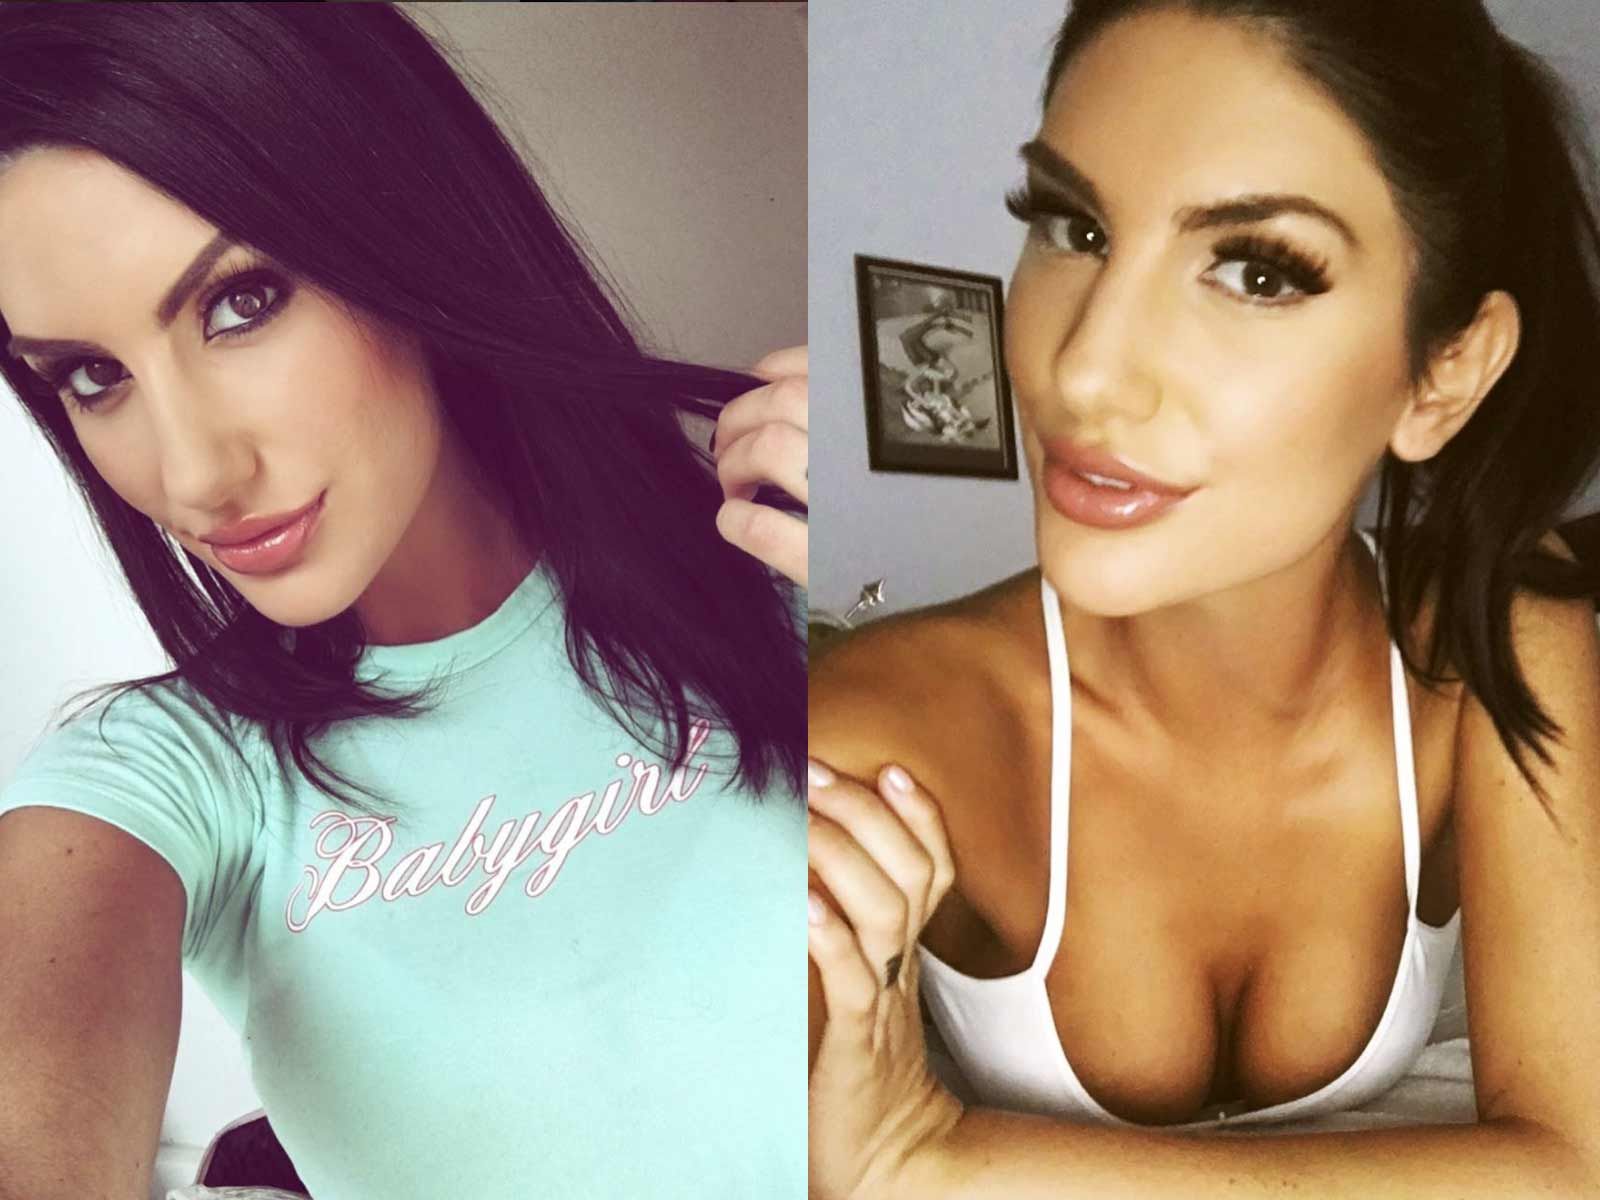 Porn Suicide - Pornstar August Ames Dies at 23, Suicide By Hanging (UPDATE)